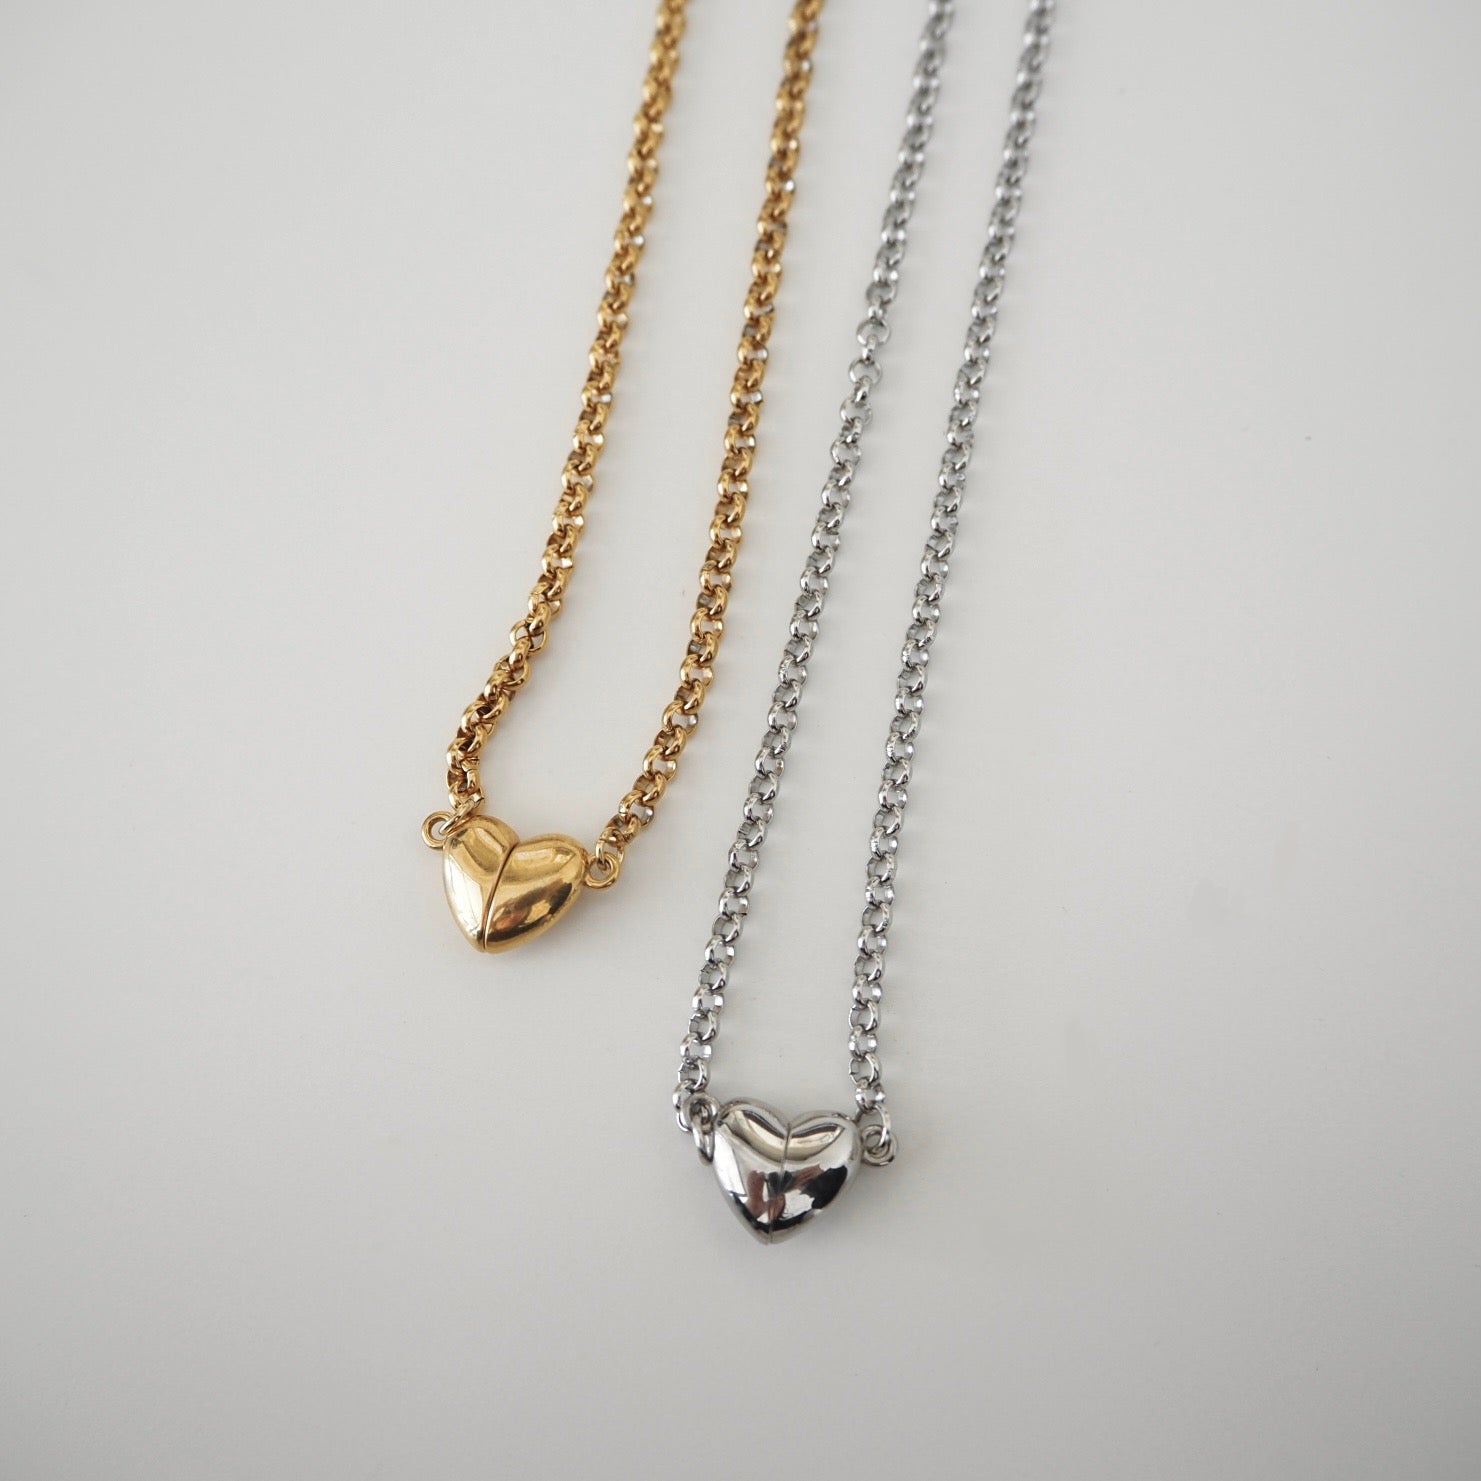 【Kids】Love magnet necklace キッズ ネックレス ｜ LUNACHIC（ルナシック）